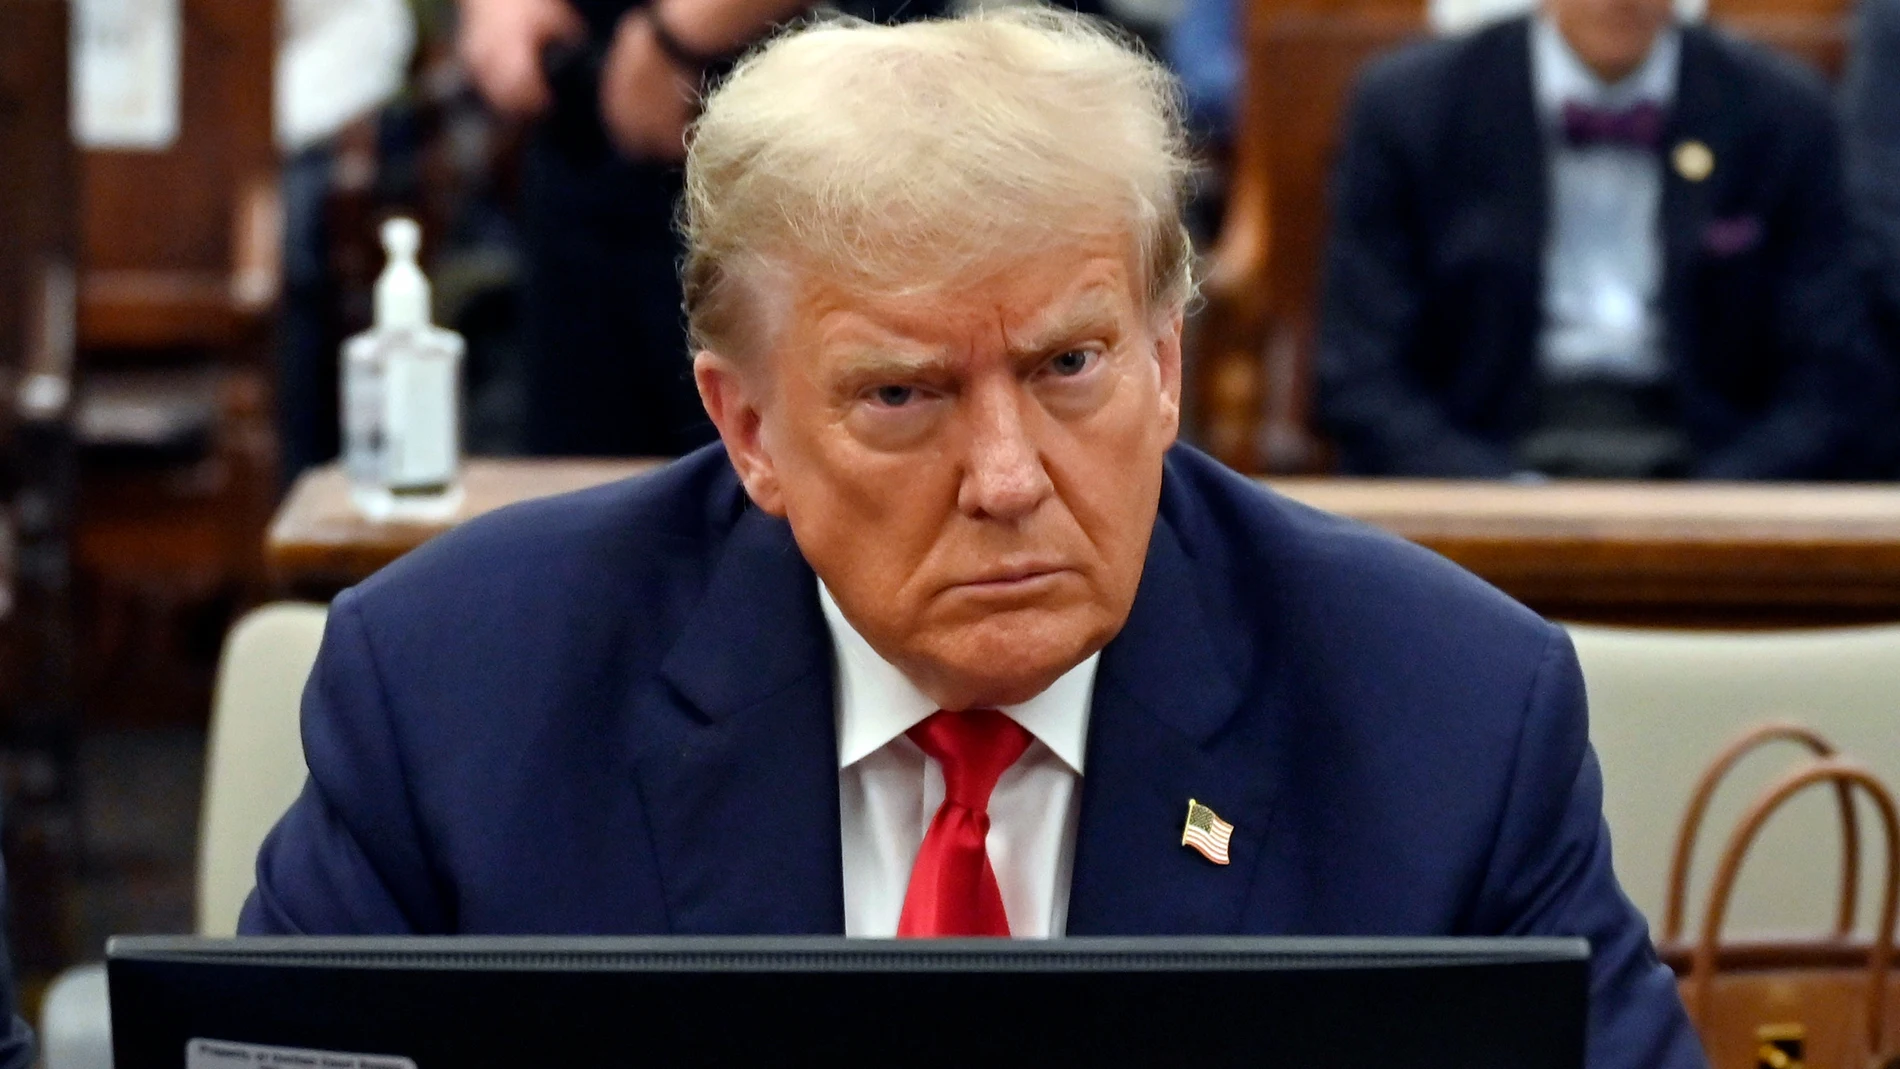 FILE - Former President Donald Trump sits during his civil fraud trial at the State Supreme Court building in New York, Oct. 4, 2023. Trump is set to be questioned under oath as part of lawsuits from two former FBI employees who provoked the former president's outrage after sending each other pejorative text messages about him.(Angela Weiss/Pool via AP)